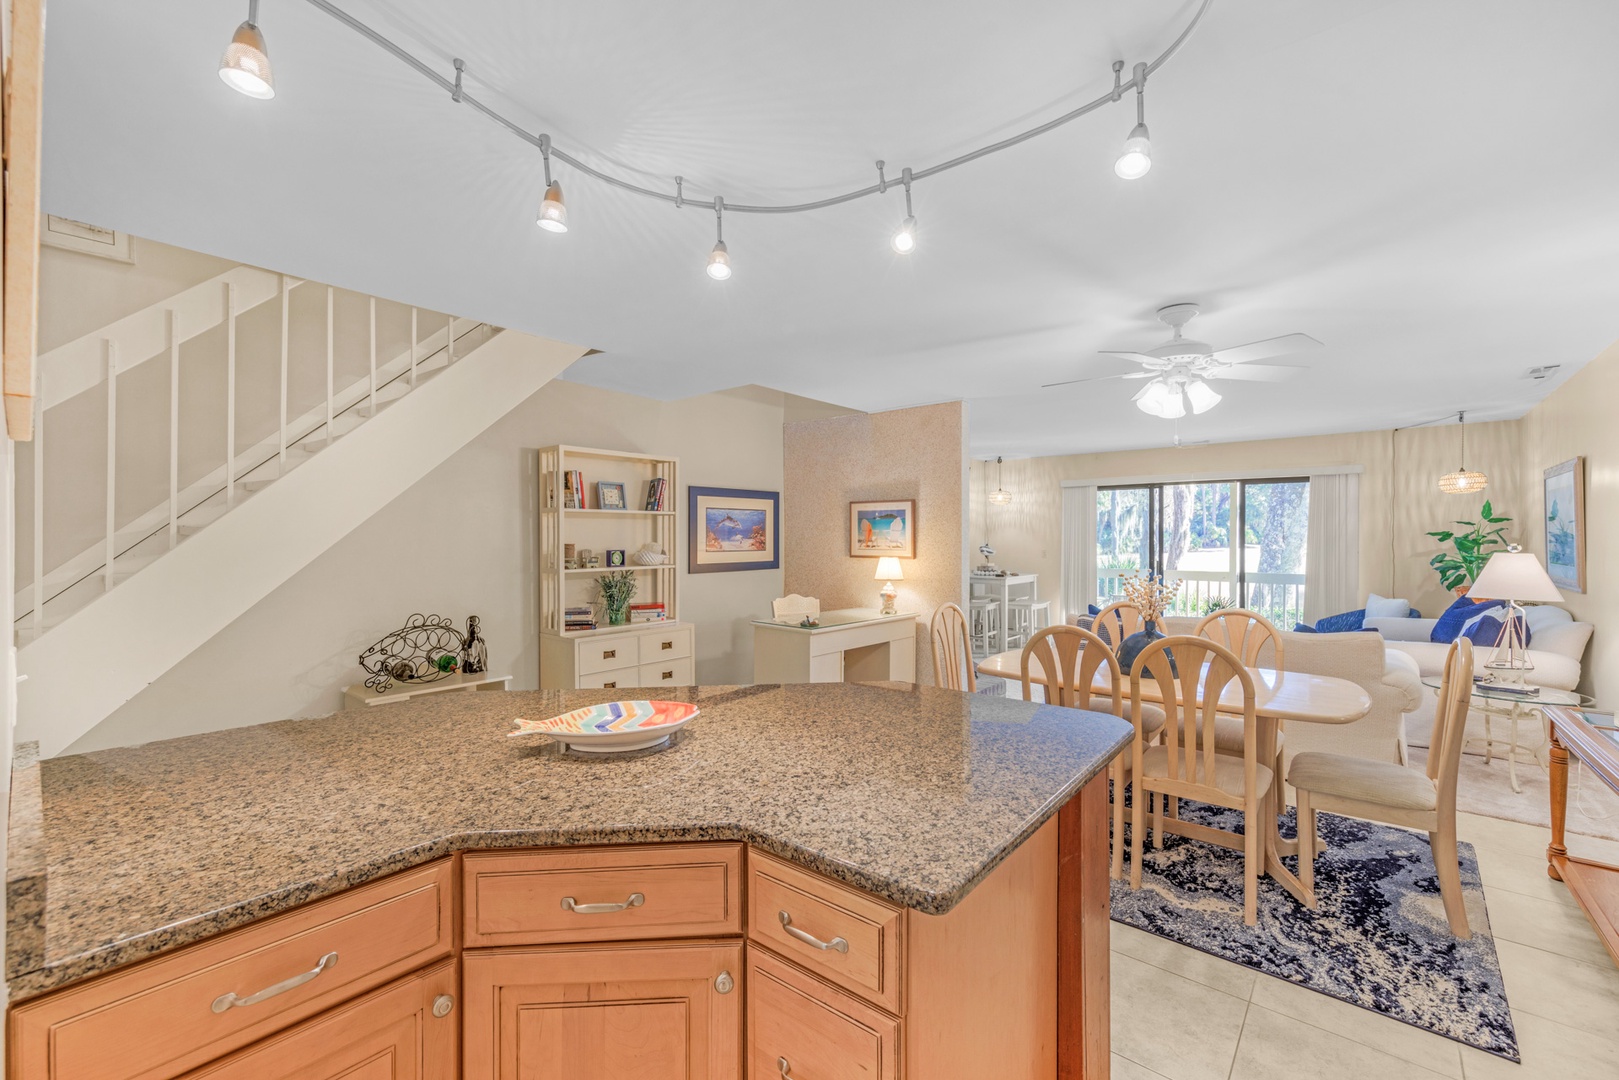 This quaint kitchen offers ample storage space & all the comforts of home